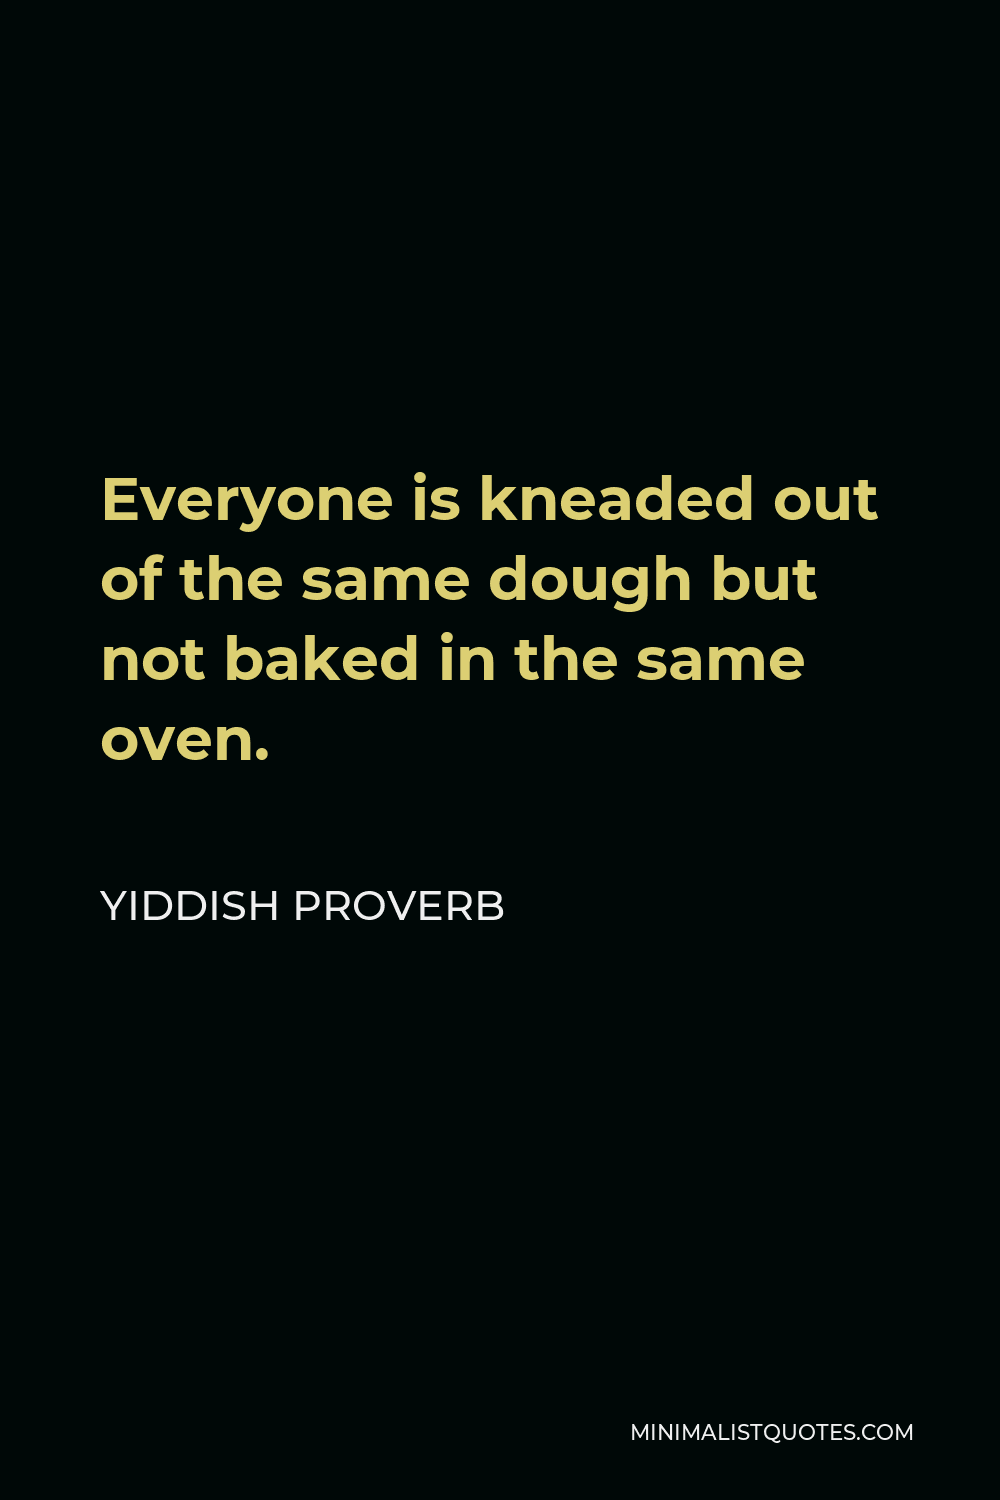 Yiddish Proverb Quote - Everyone is kneaded out of the same dough but not baked in the same oven.